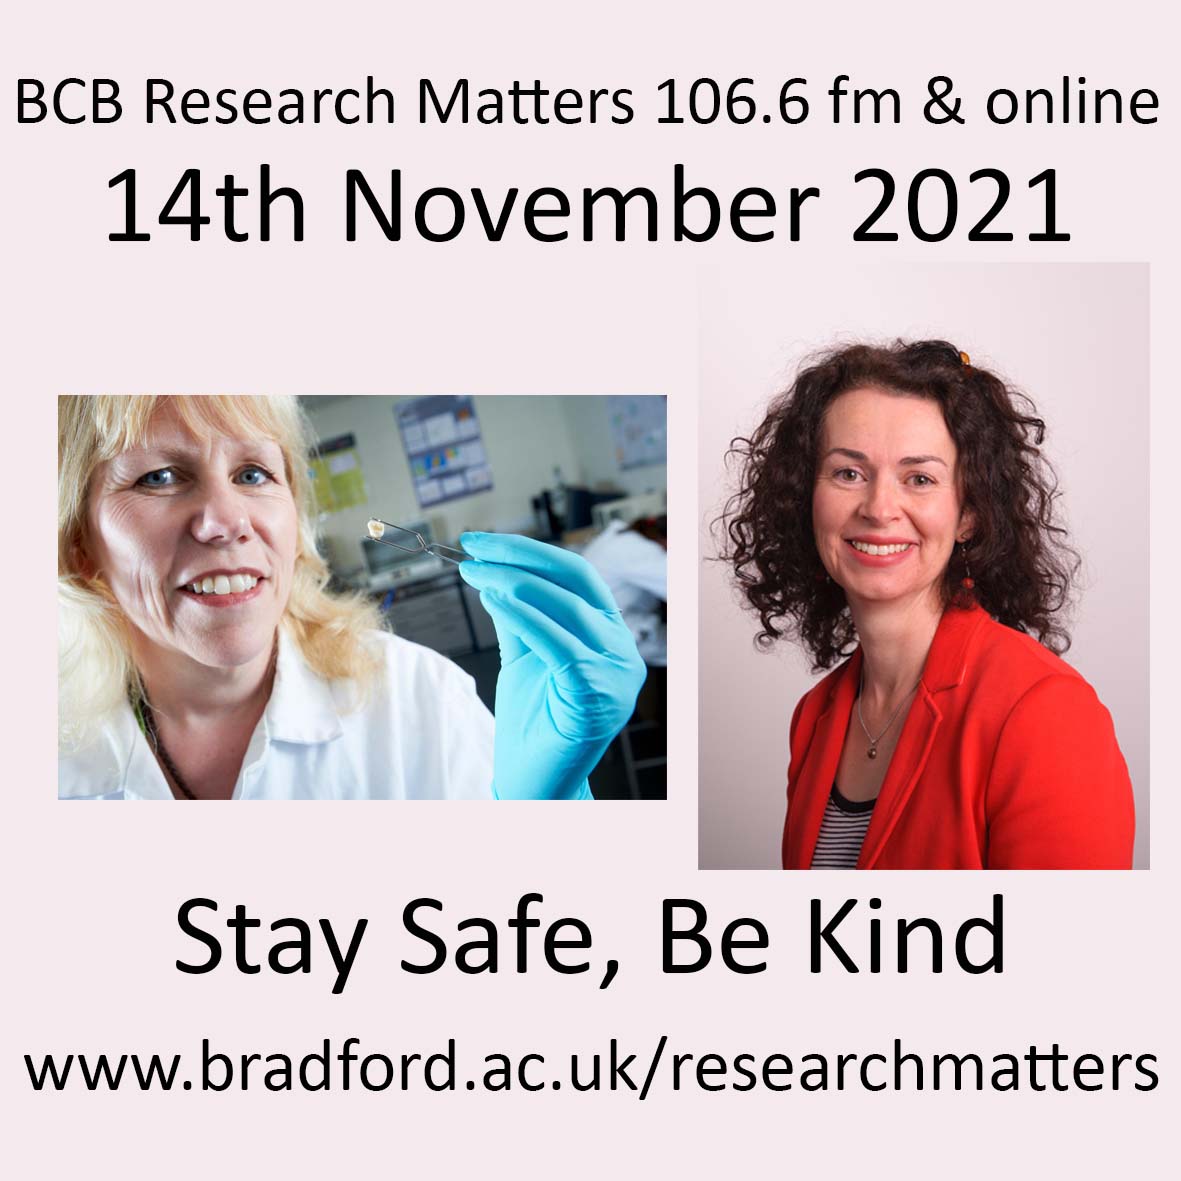 My guests on next @bcbradio Research Matters are @BradToothFairy on chemical analysis of teeth revealing health and @DrSiobhanReilly on what matters most to people living with dementia. Plus @UniofBradford research news, events, next @BfdCafe and music. Tune in Sun 14 Nov, 1 pm